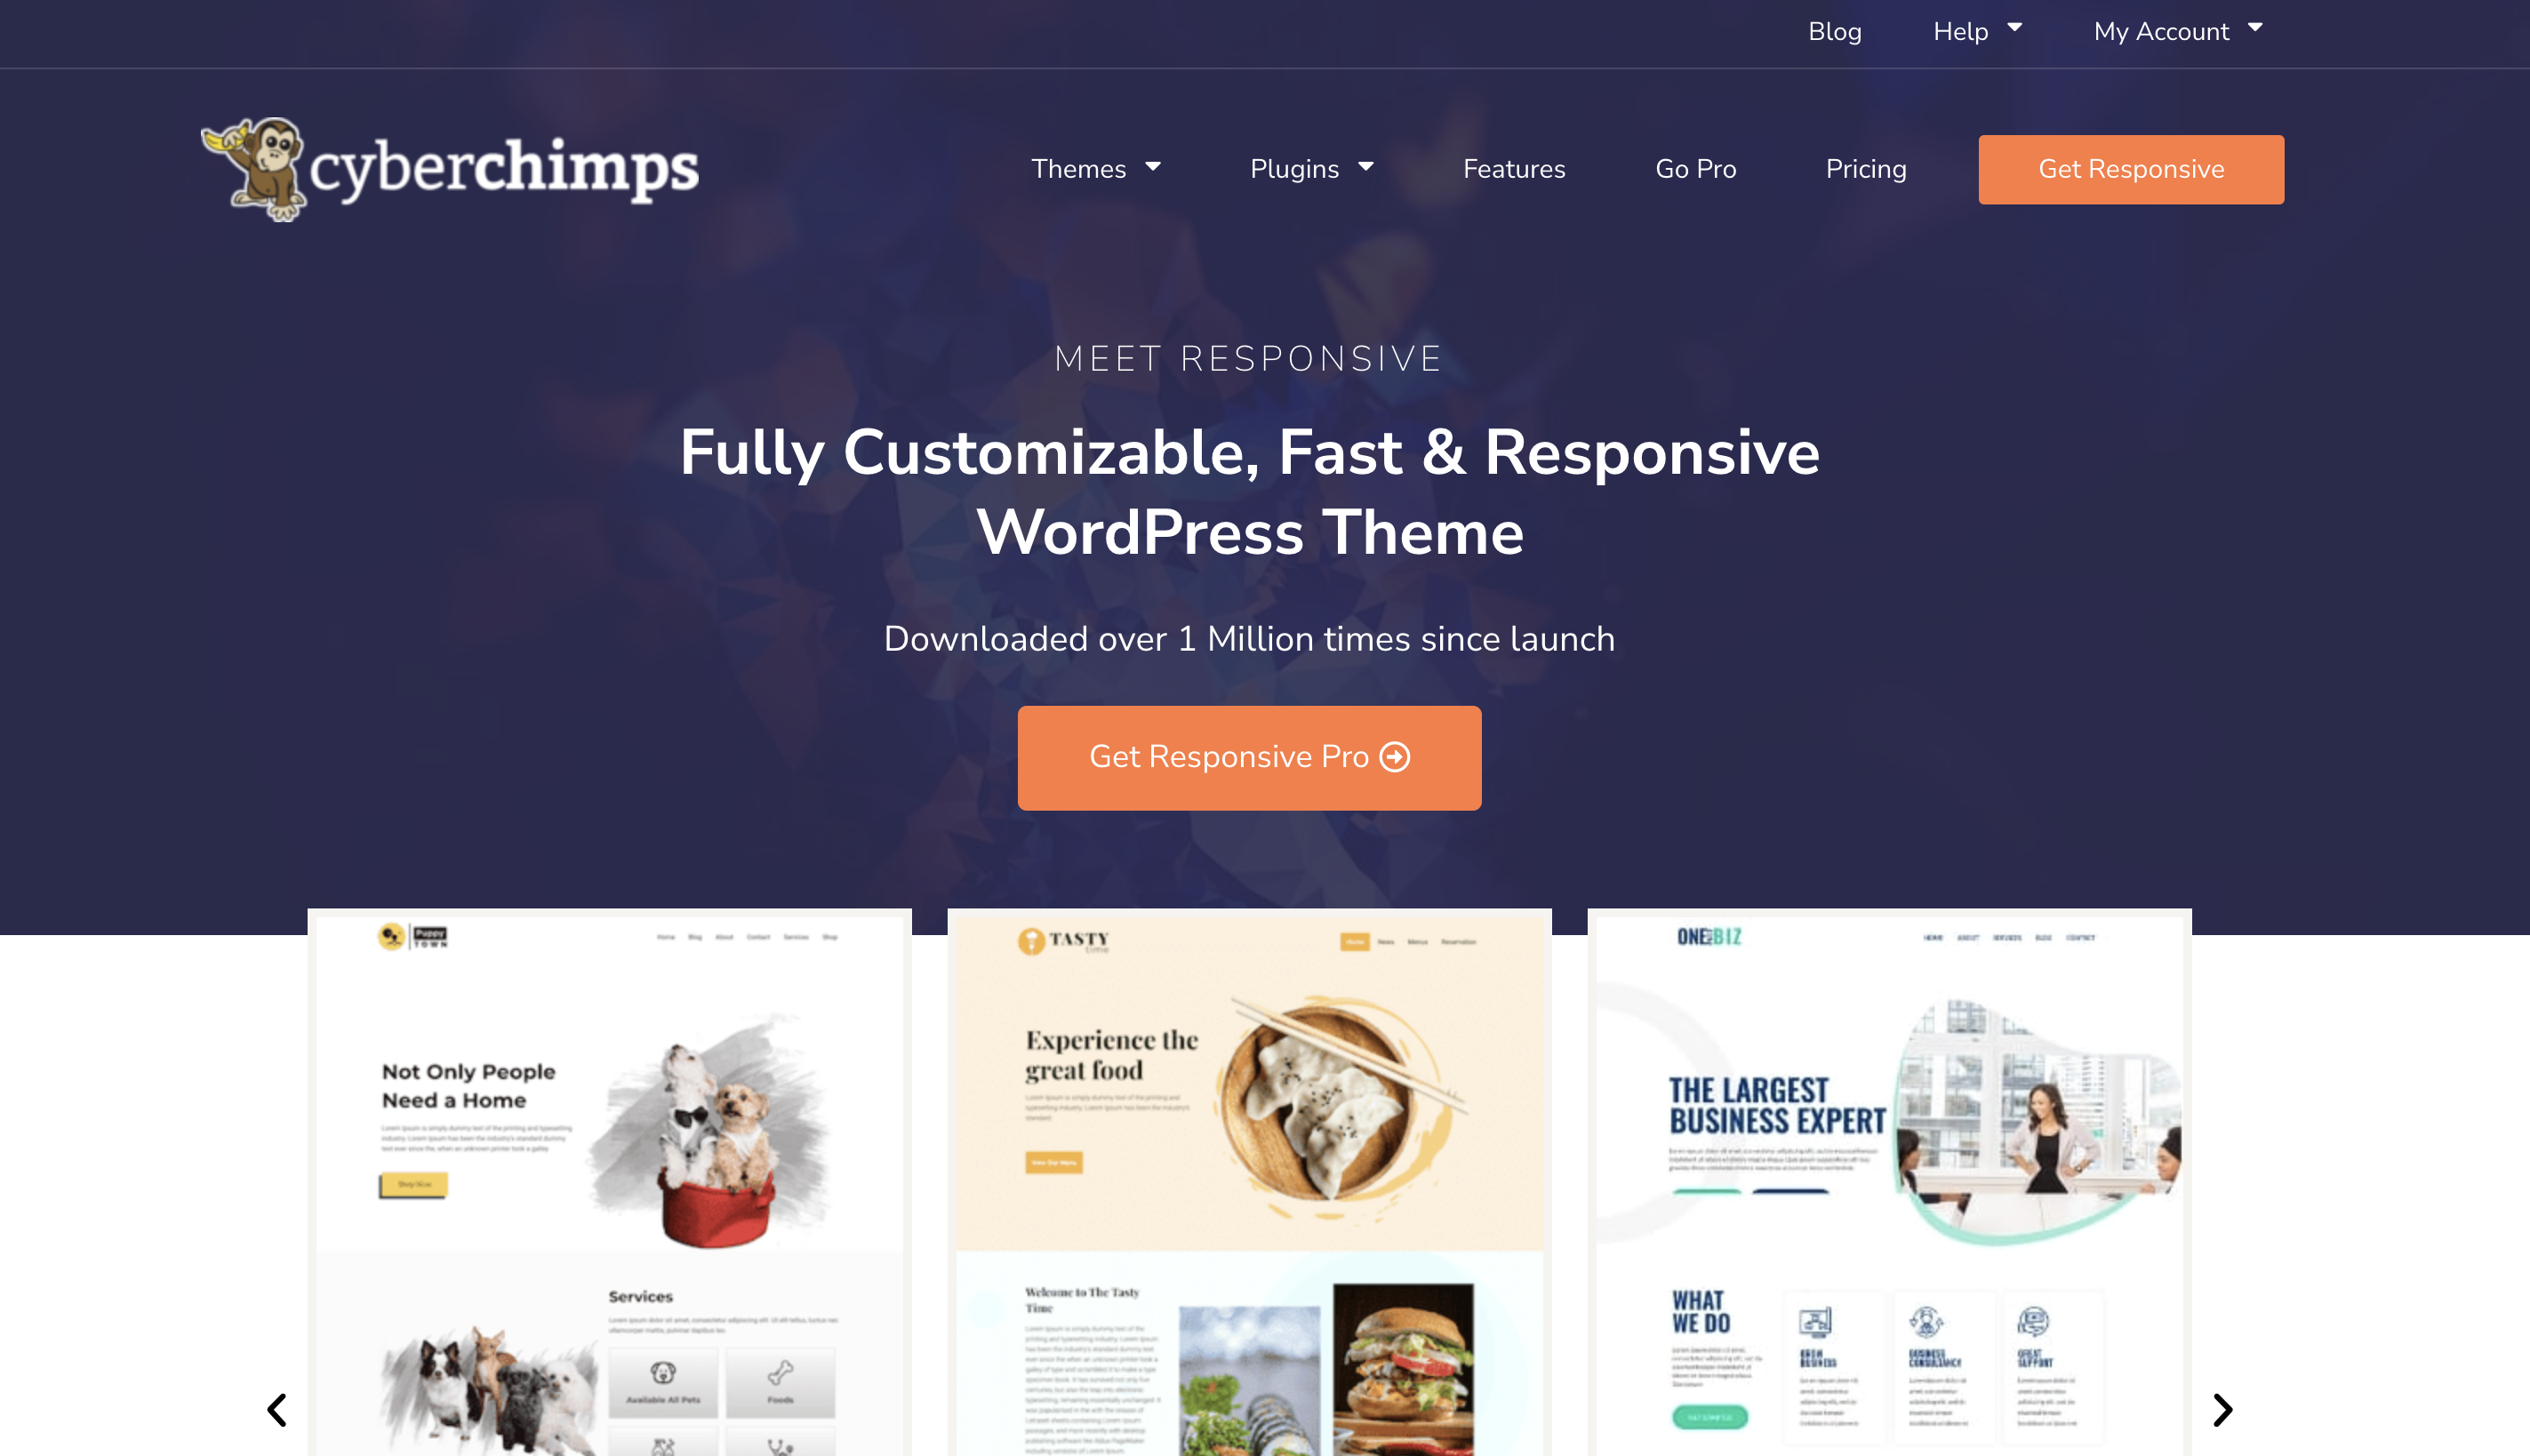 Themeforest competitor with variety of themes